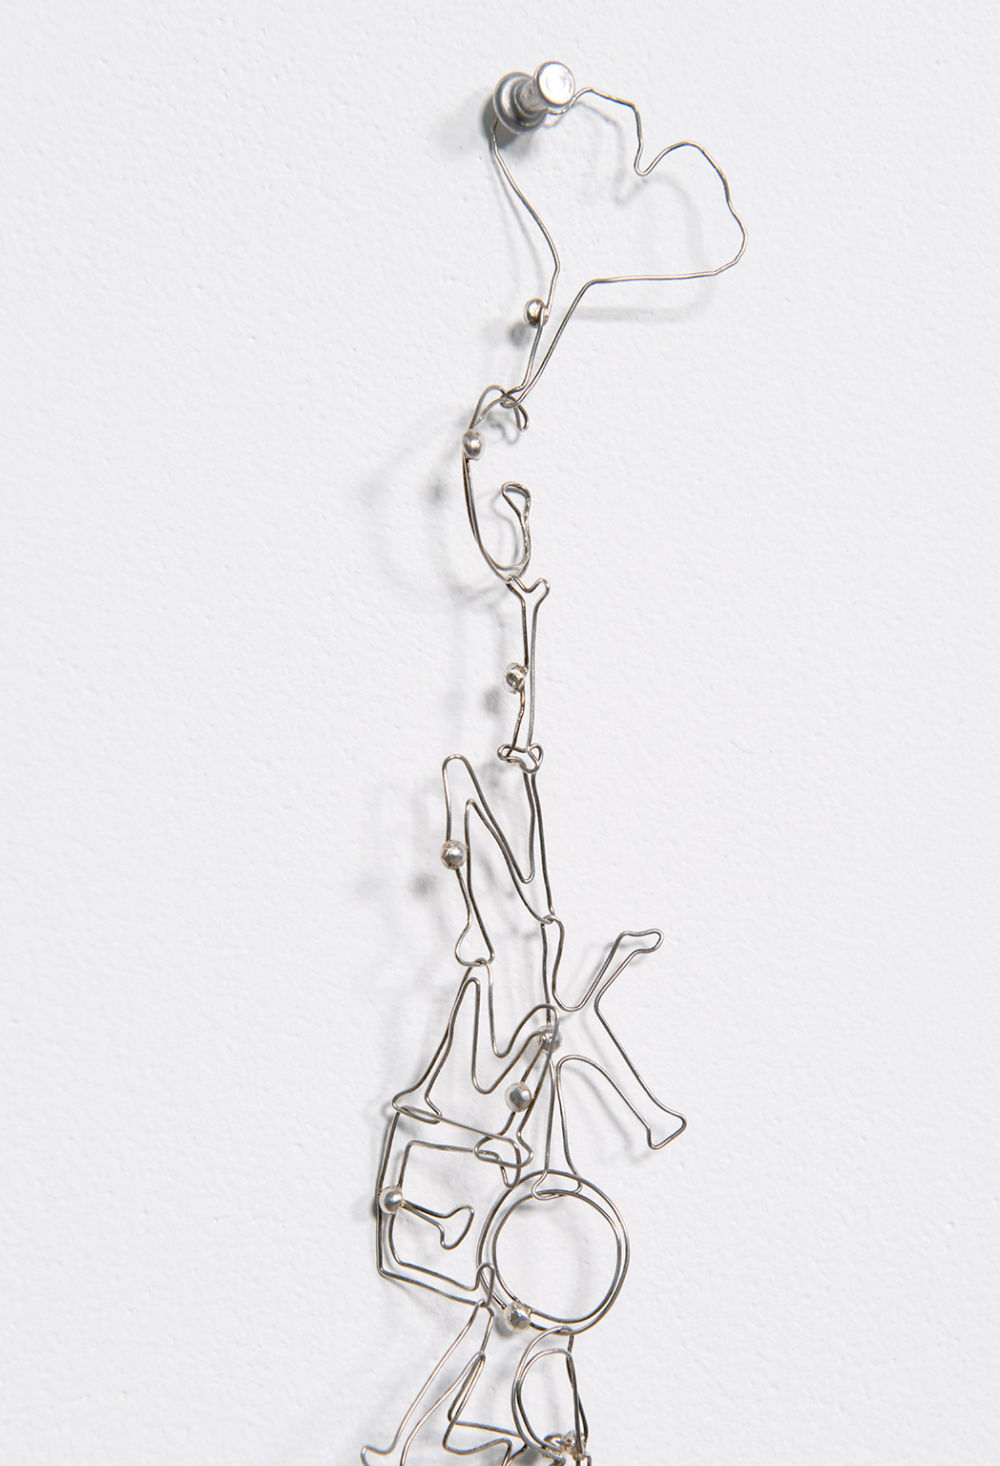 Christina Mackie, Gingko biloba memory tree (The confusion part III) (detail), 2012, silver chain, 21 x 2 x 2 in. (53 x 5 x 4 cm) by 